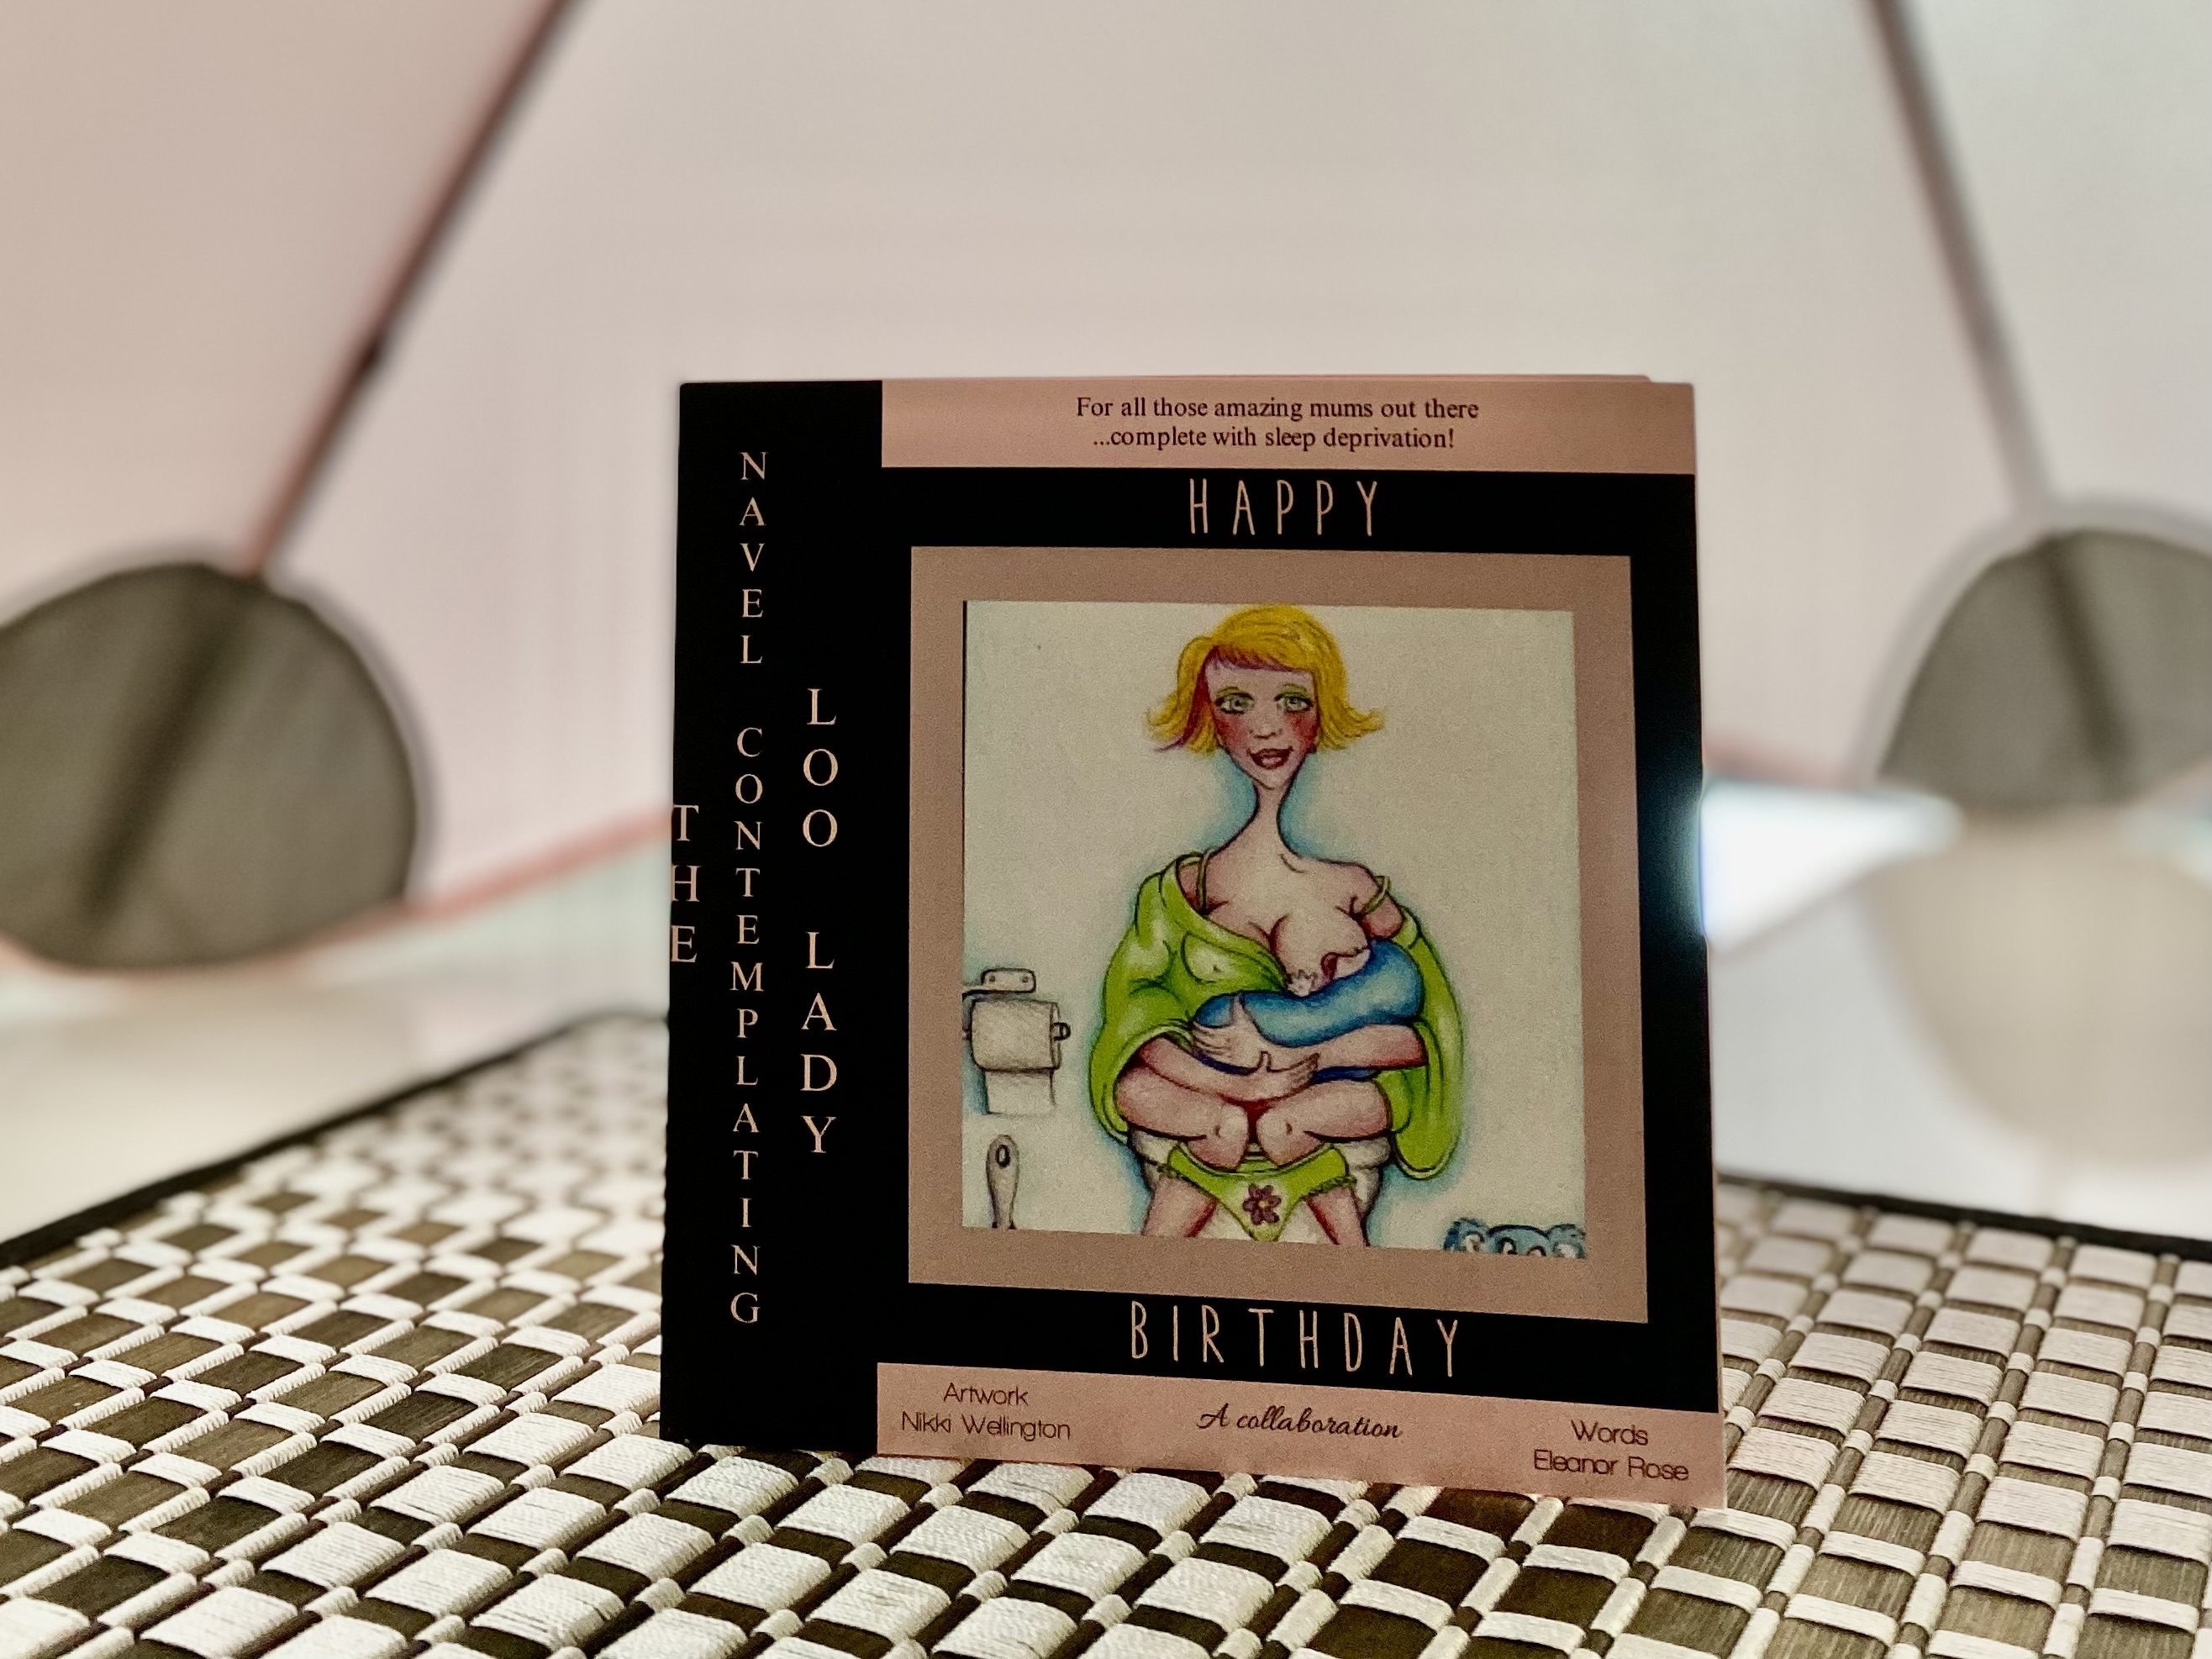 THE NAVEL CONTEMPLATING LOO LAY HAPPY BIRTHDAY CARD